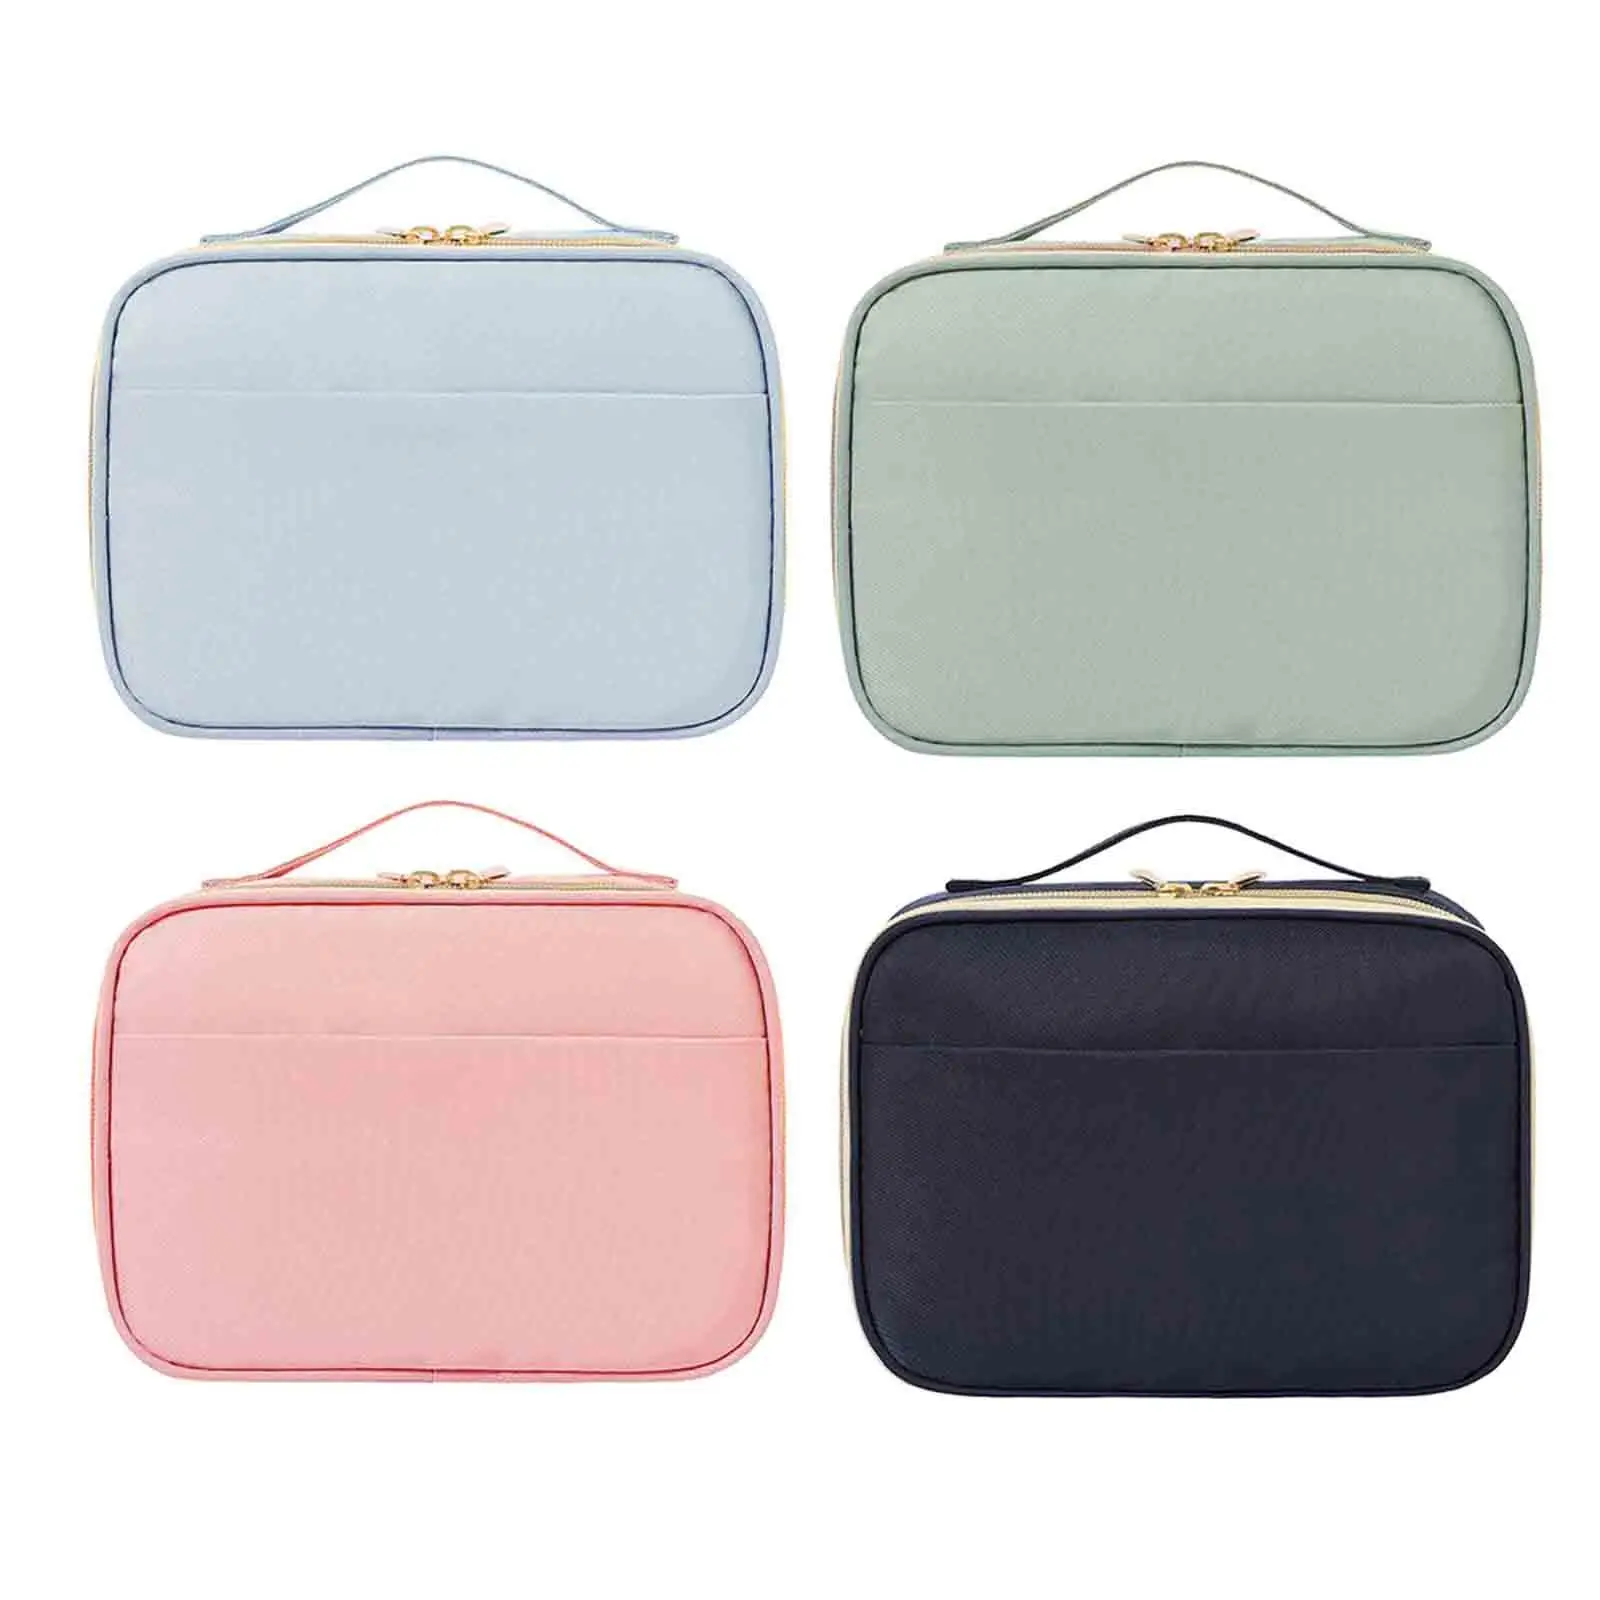 2 in 1 Makeup Bag Fashionable Zipper Pouch Foldable Home Use Container Waterproof Toiletry Bag Organizer for Toiletries Bathroom